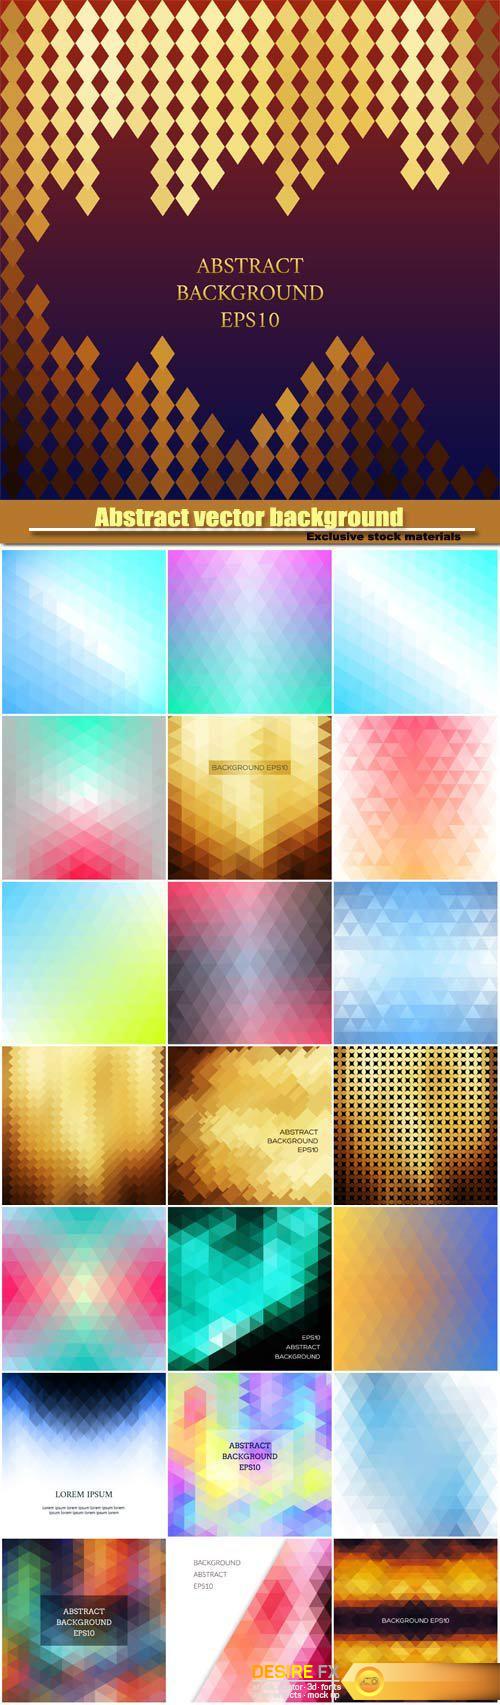 Abstract vector background in isometric style, geometric pattern